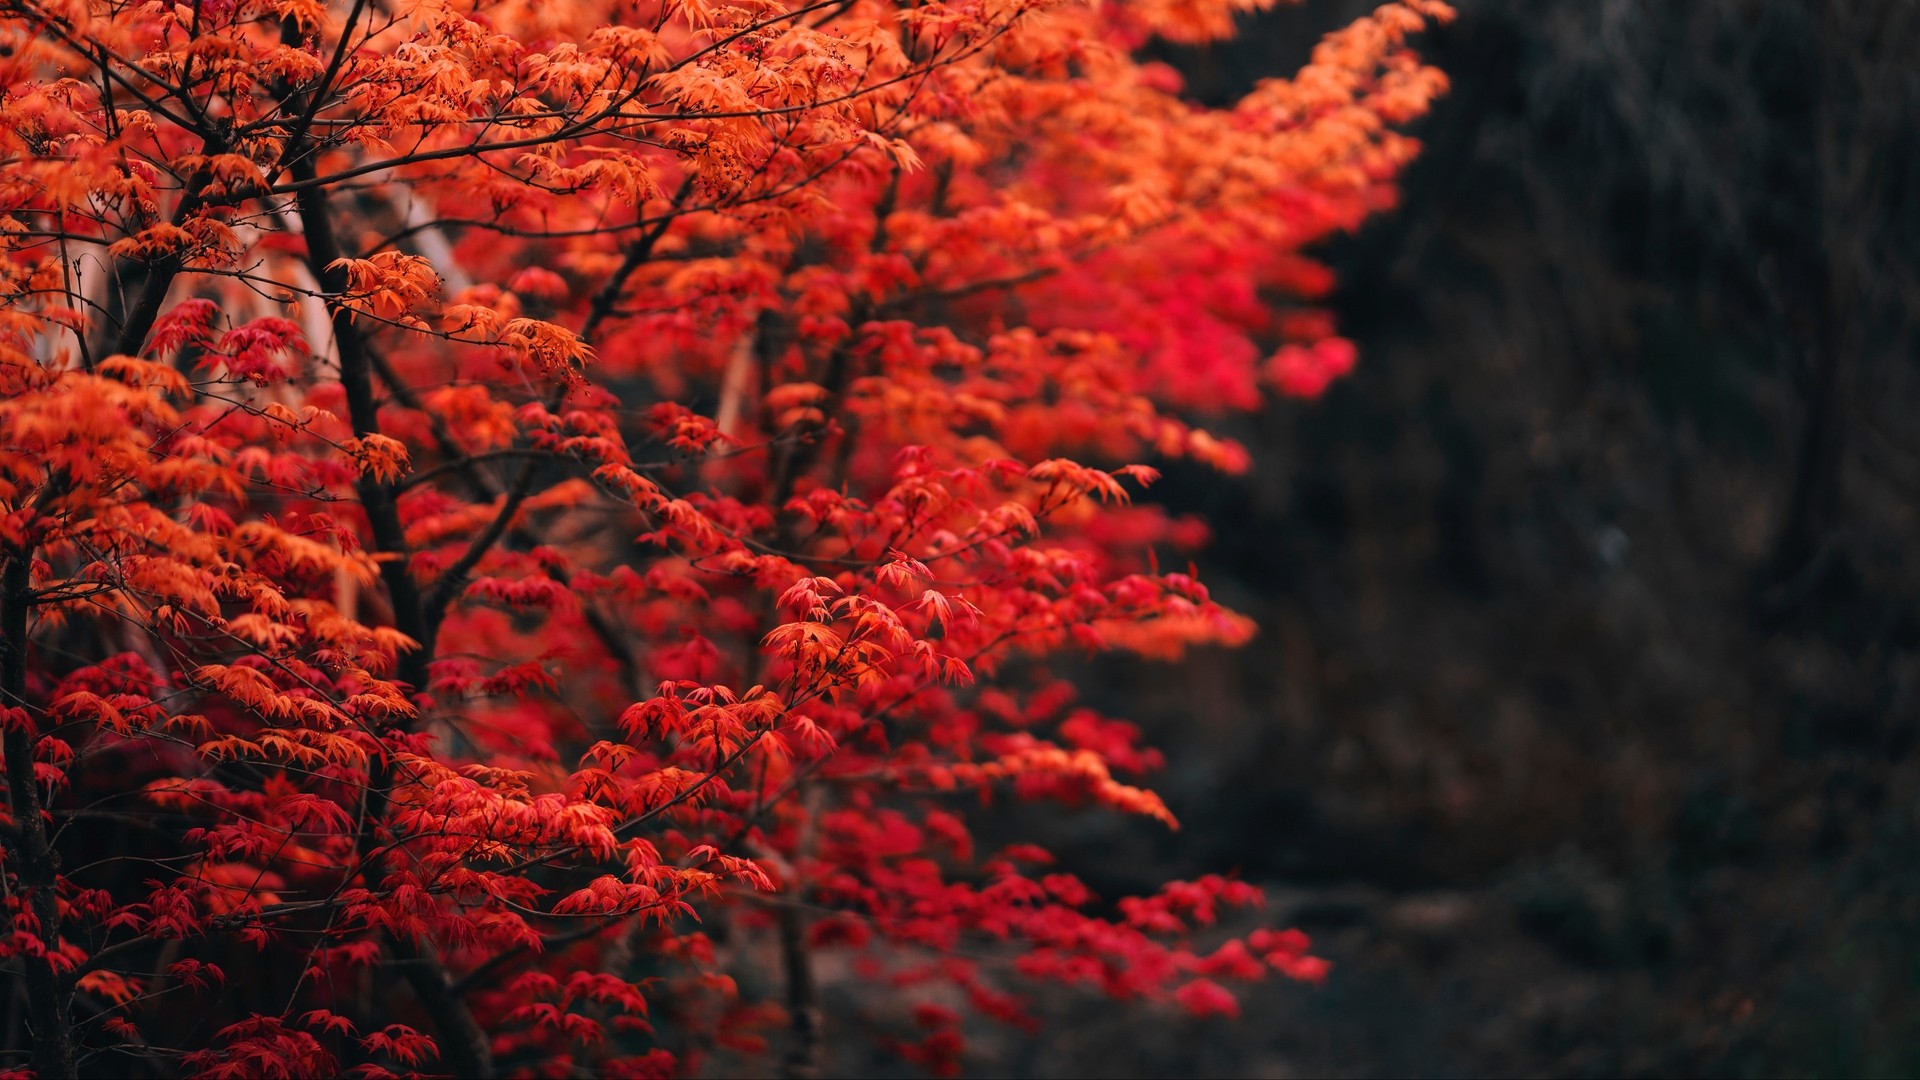 1920x1080 wallpapers: tree, branches, leaves, red, velocidad (image)